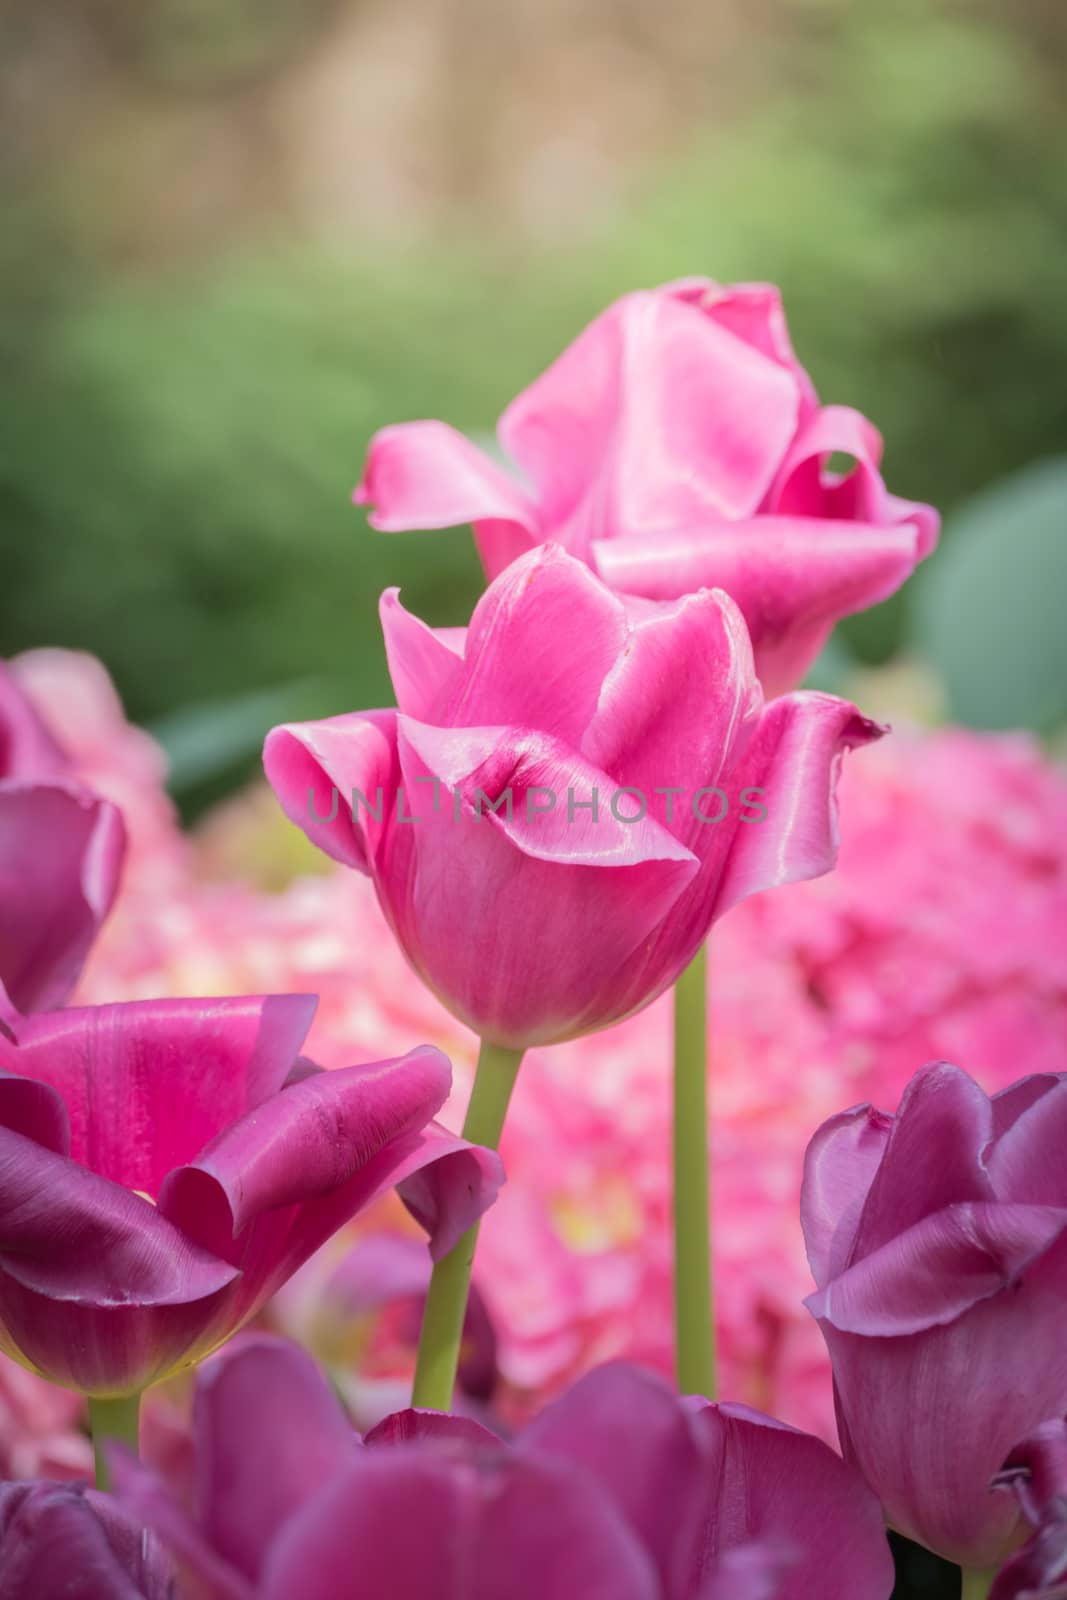 Beautiful bouquet of tulips. colorful tulips. nature background